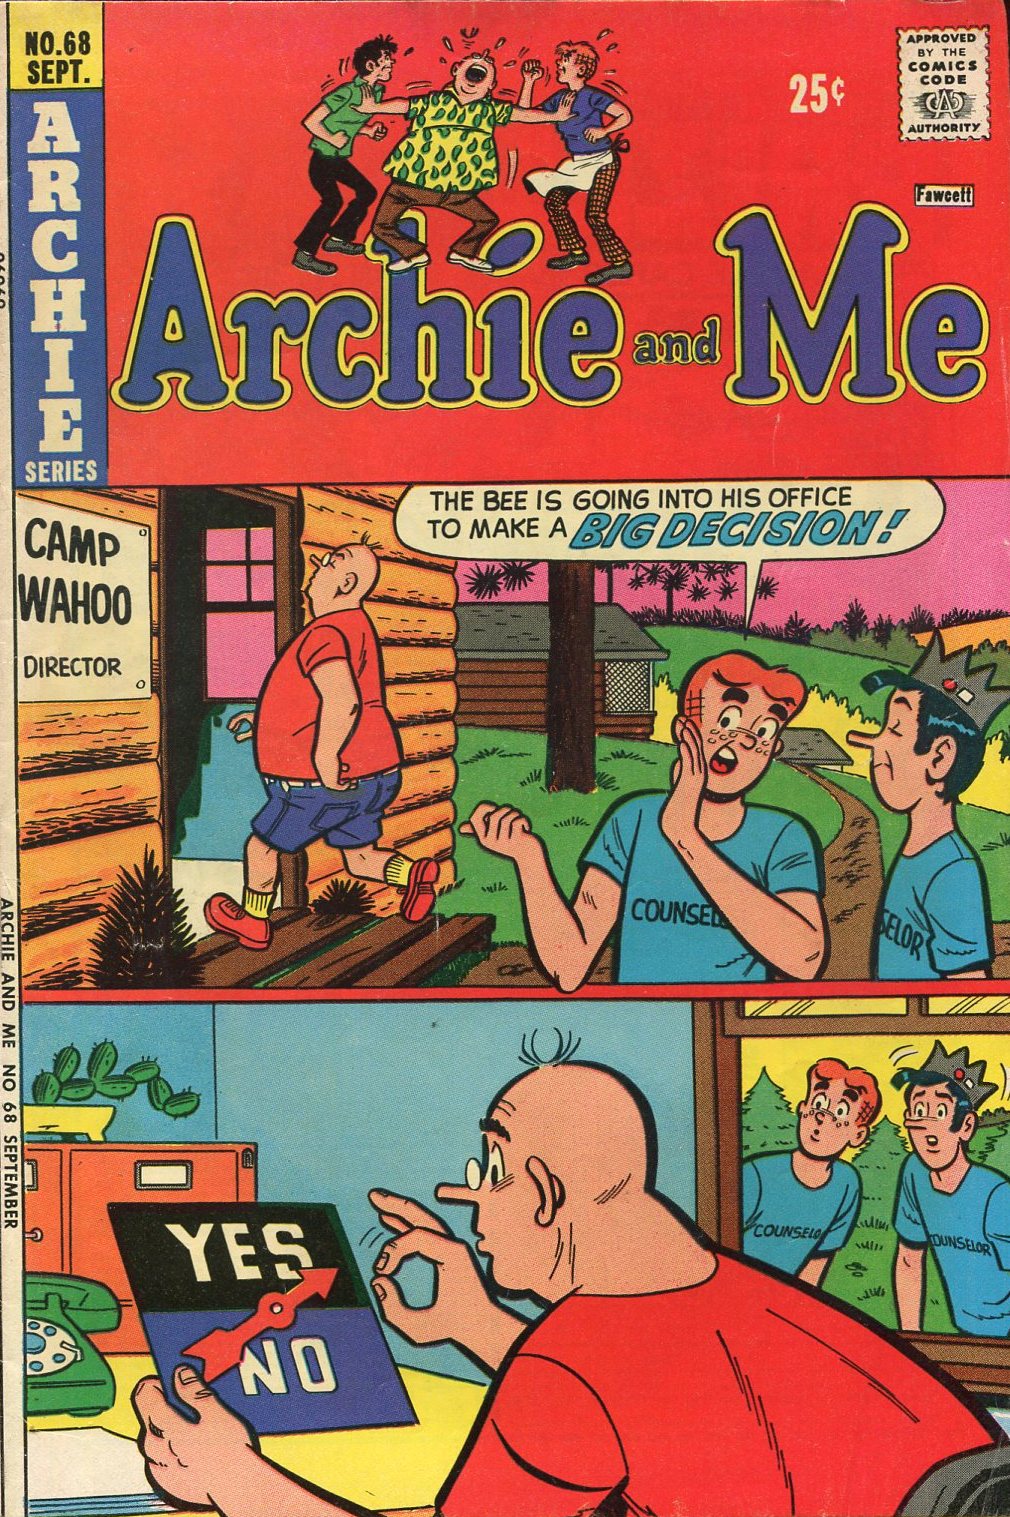 Read online Archie and Me comic -  Issue #68 - 1